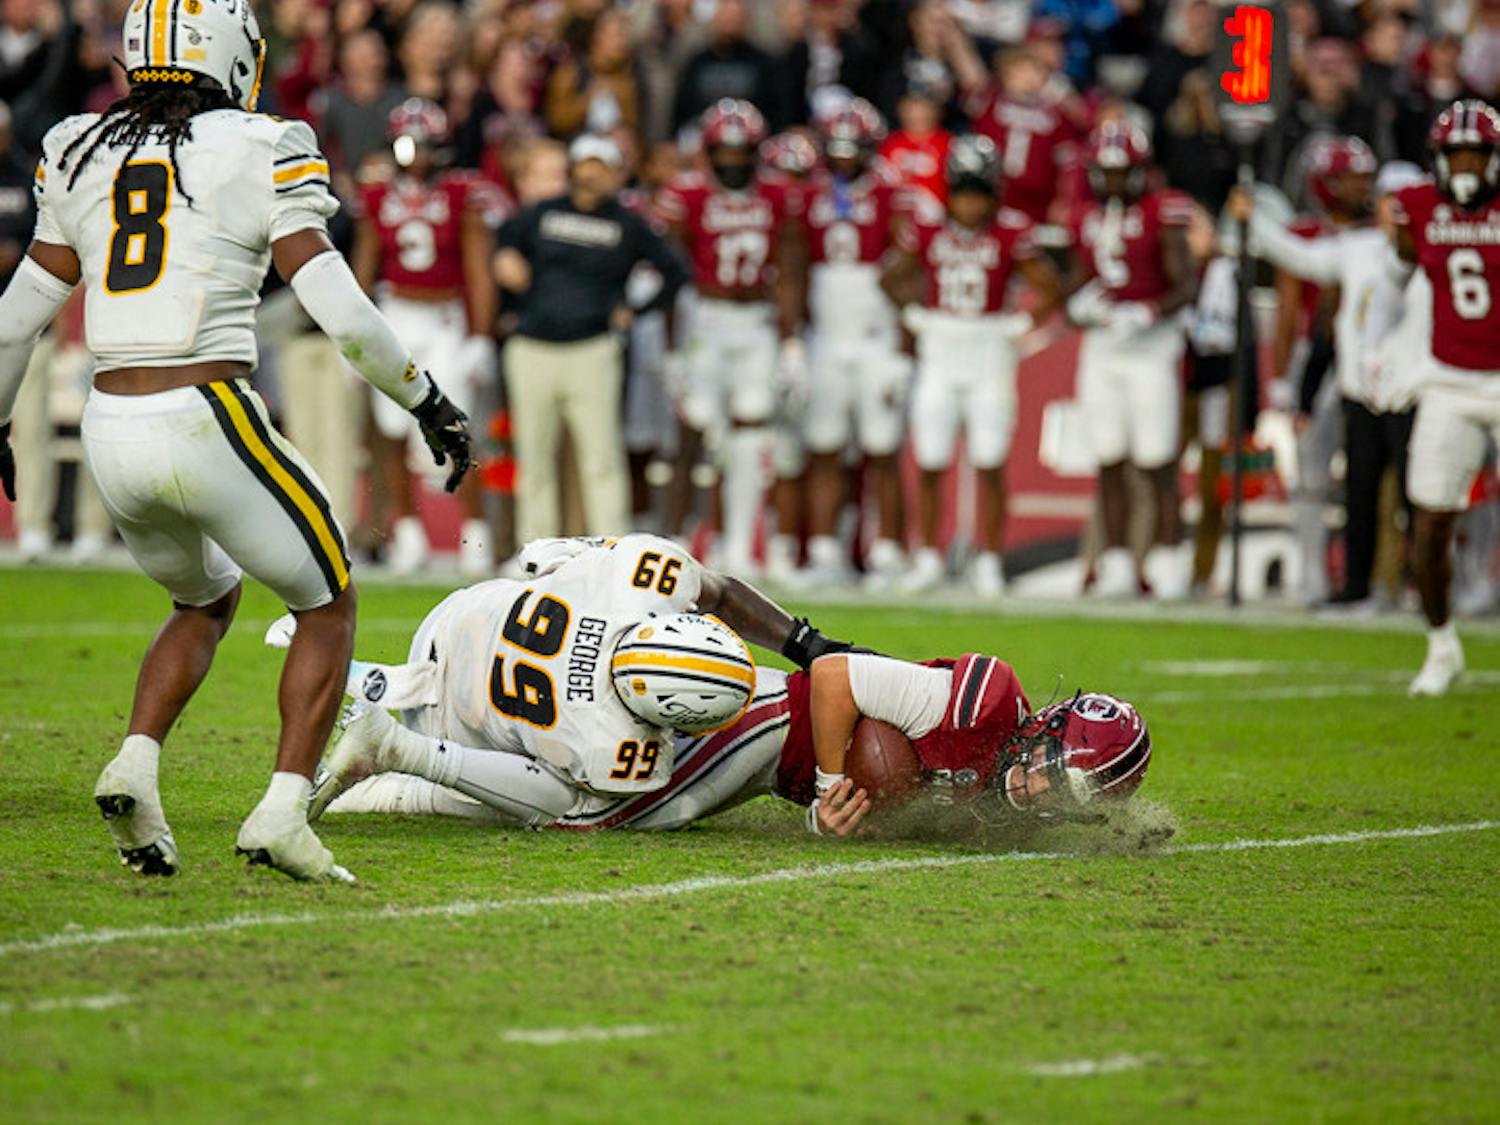 Redshirt junior quarterback Spencer Rattler gets tackled after attempting to scramble the ball down the field during the South Carolina vs. Missouri game on Oct. 29, 2022. . The Tigers beat the Gamecocks 23-10.